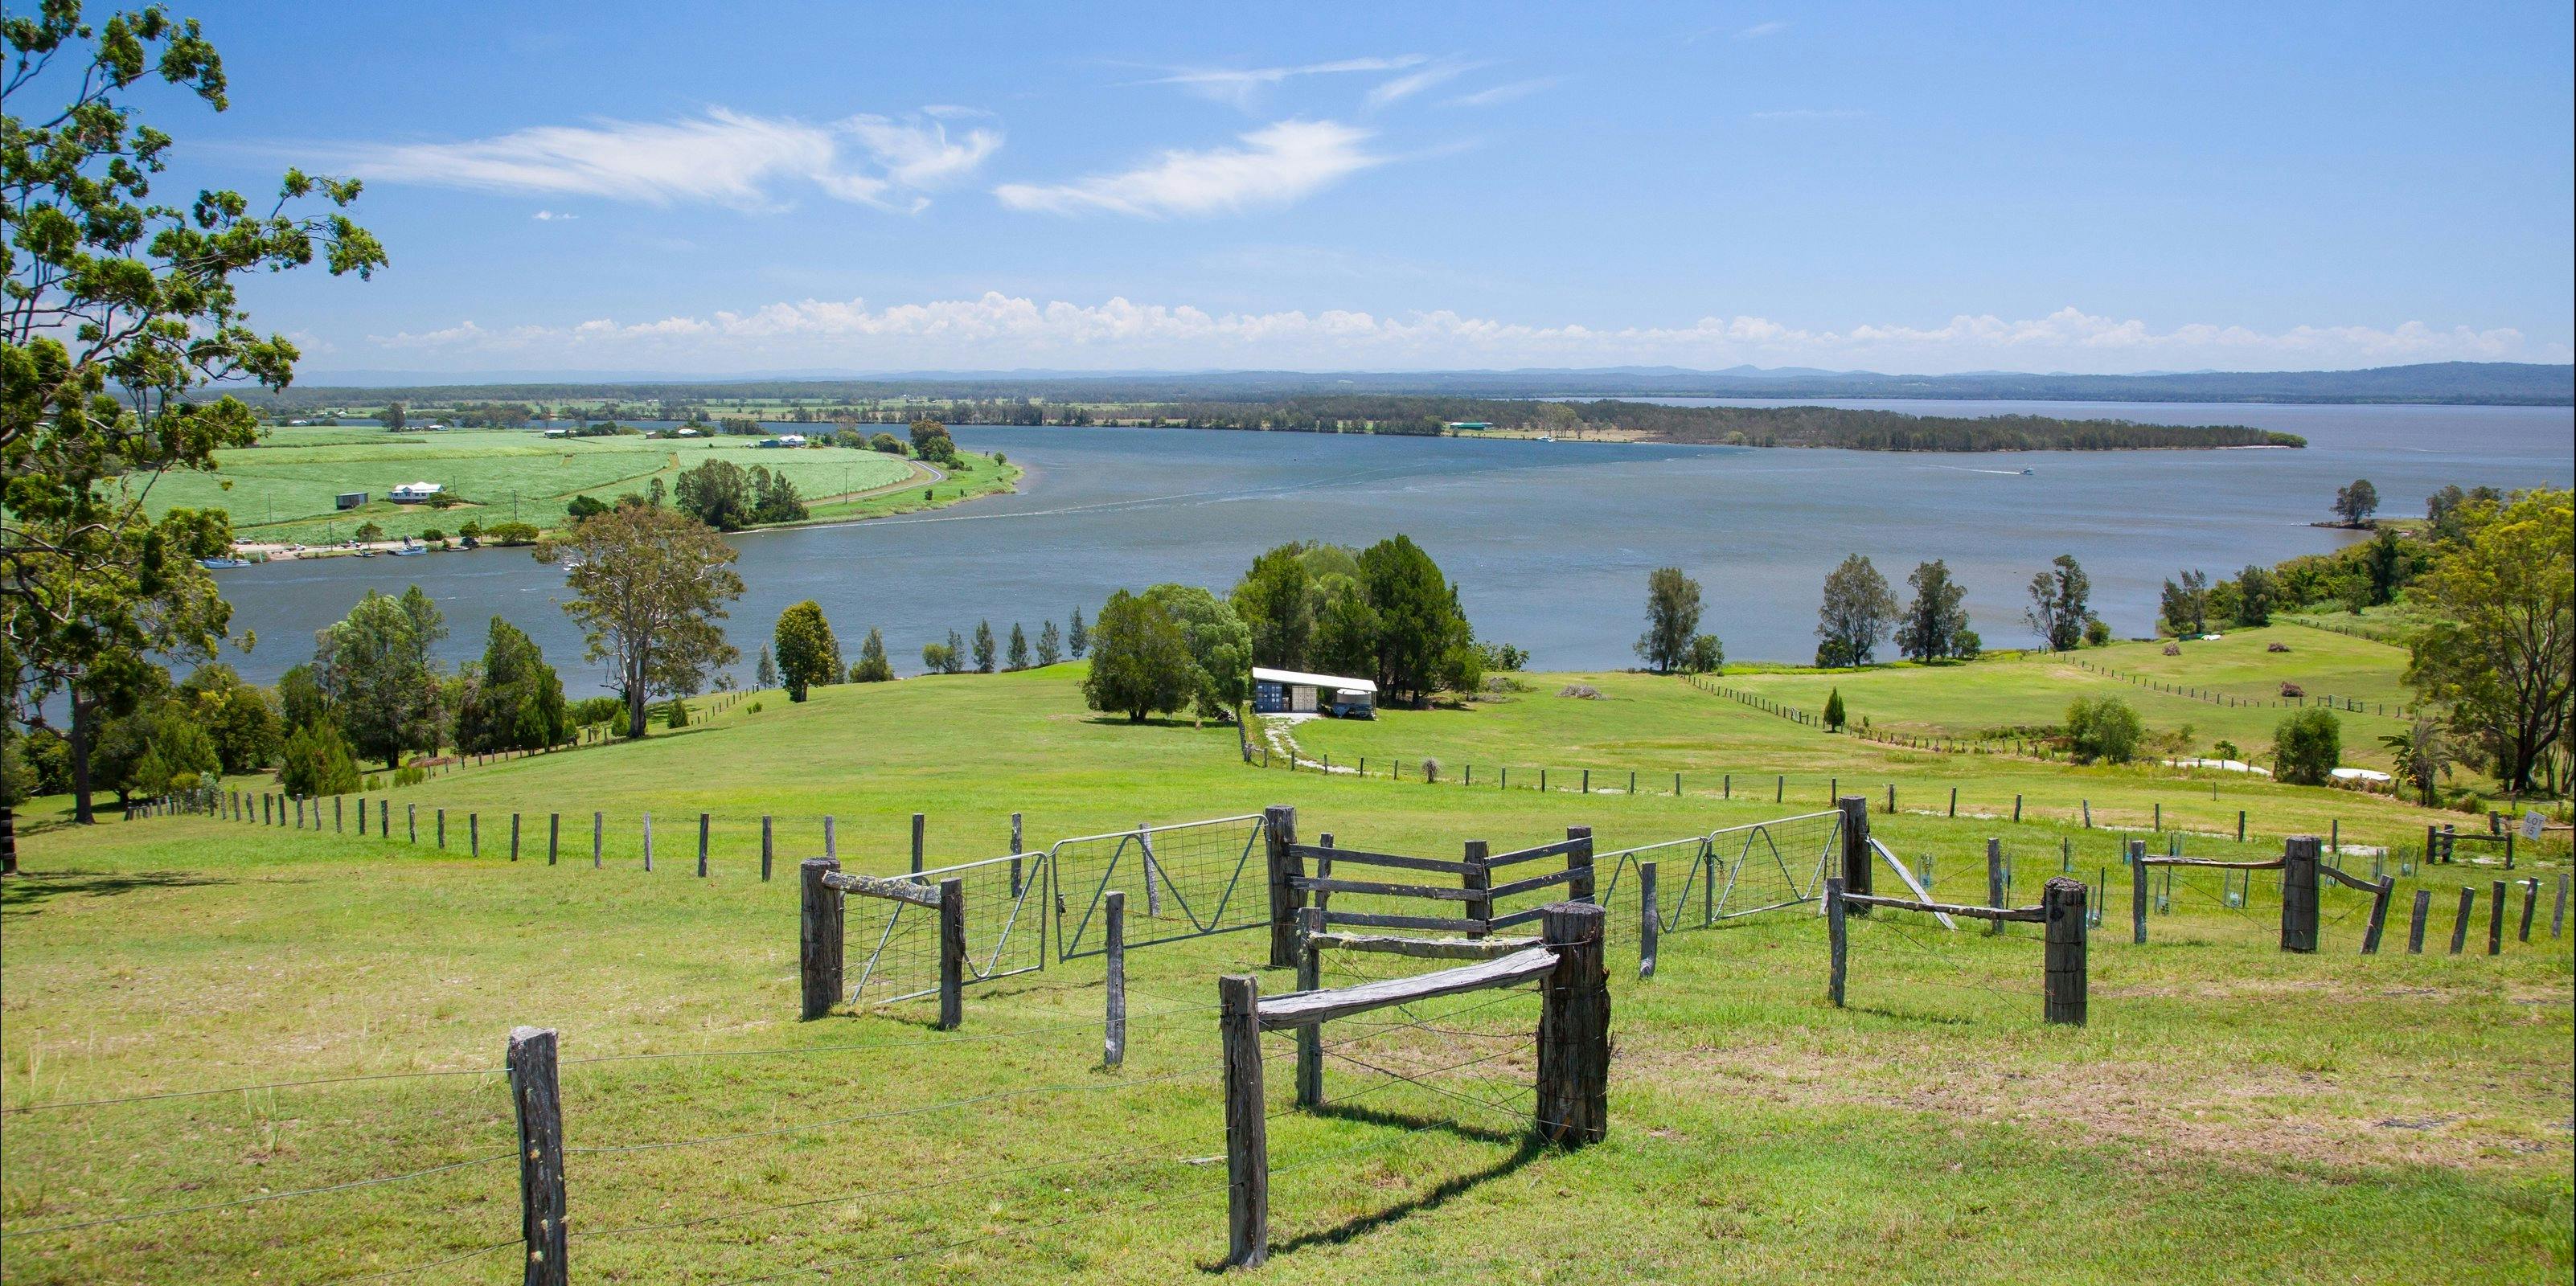 Ashby | NSW Holidays & Accommodation, Things to Do, Attractions and Events